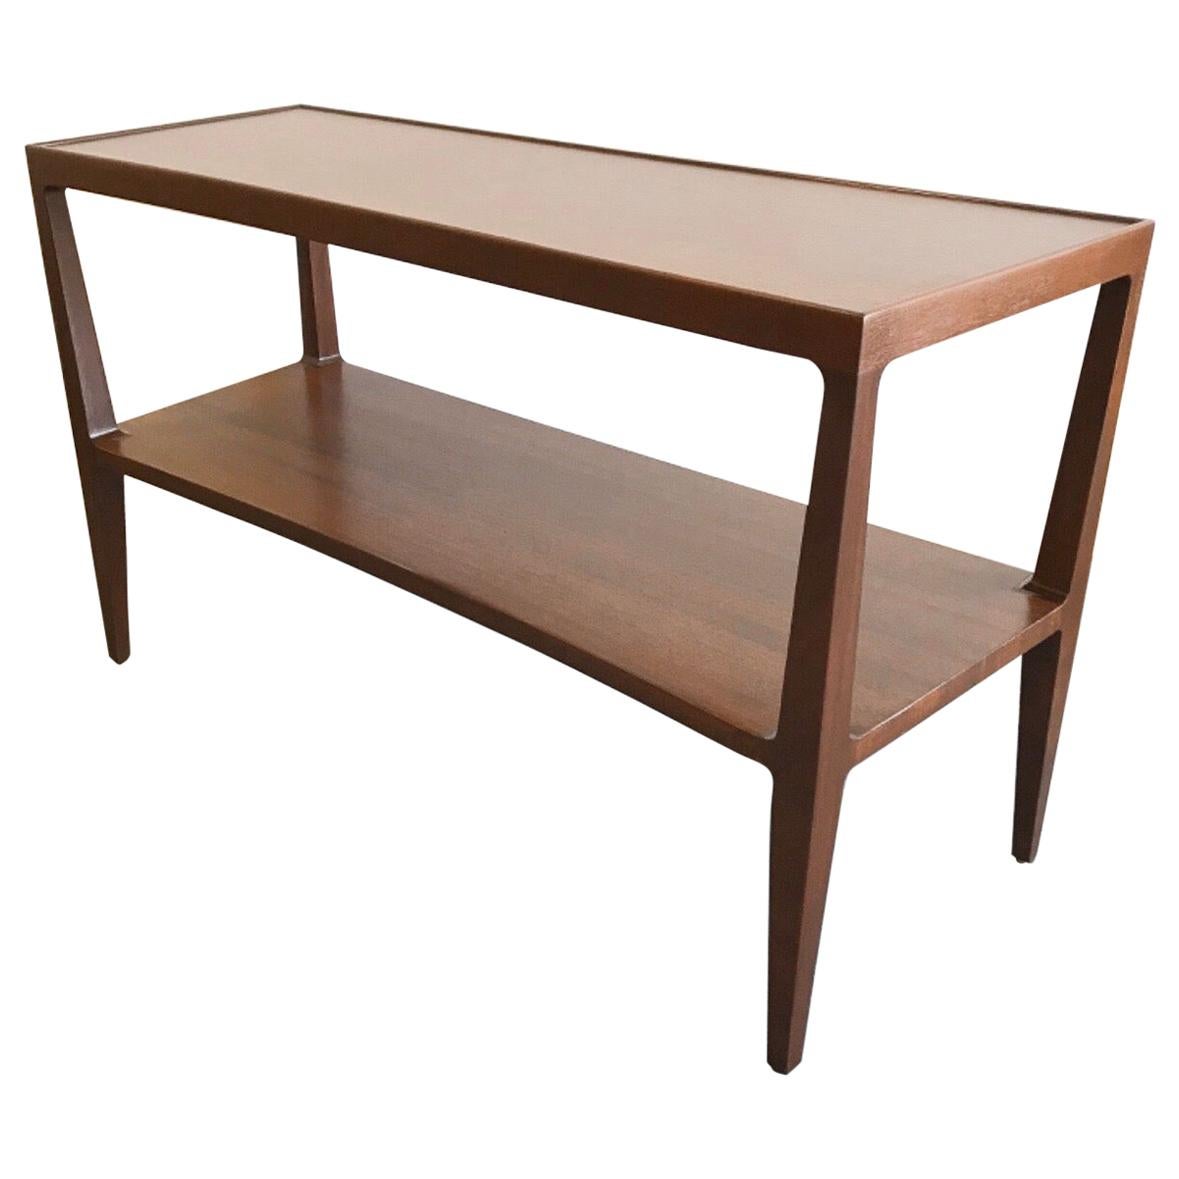 Stunning Architectural Console Table by Edward Wormley for Dunbar